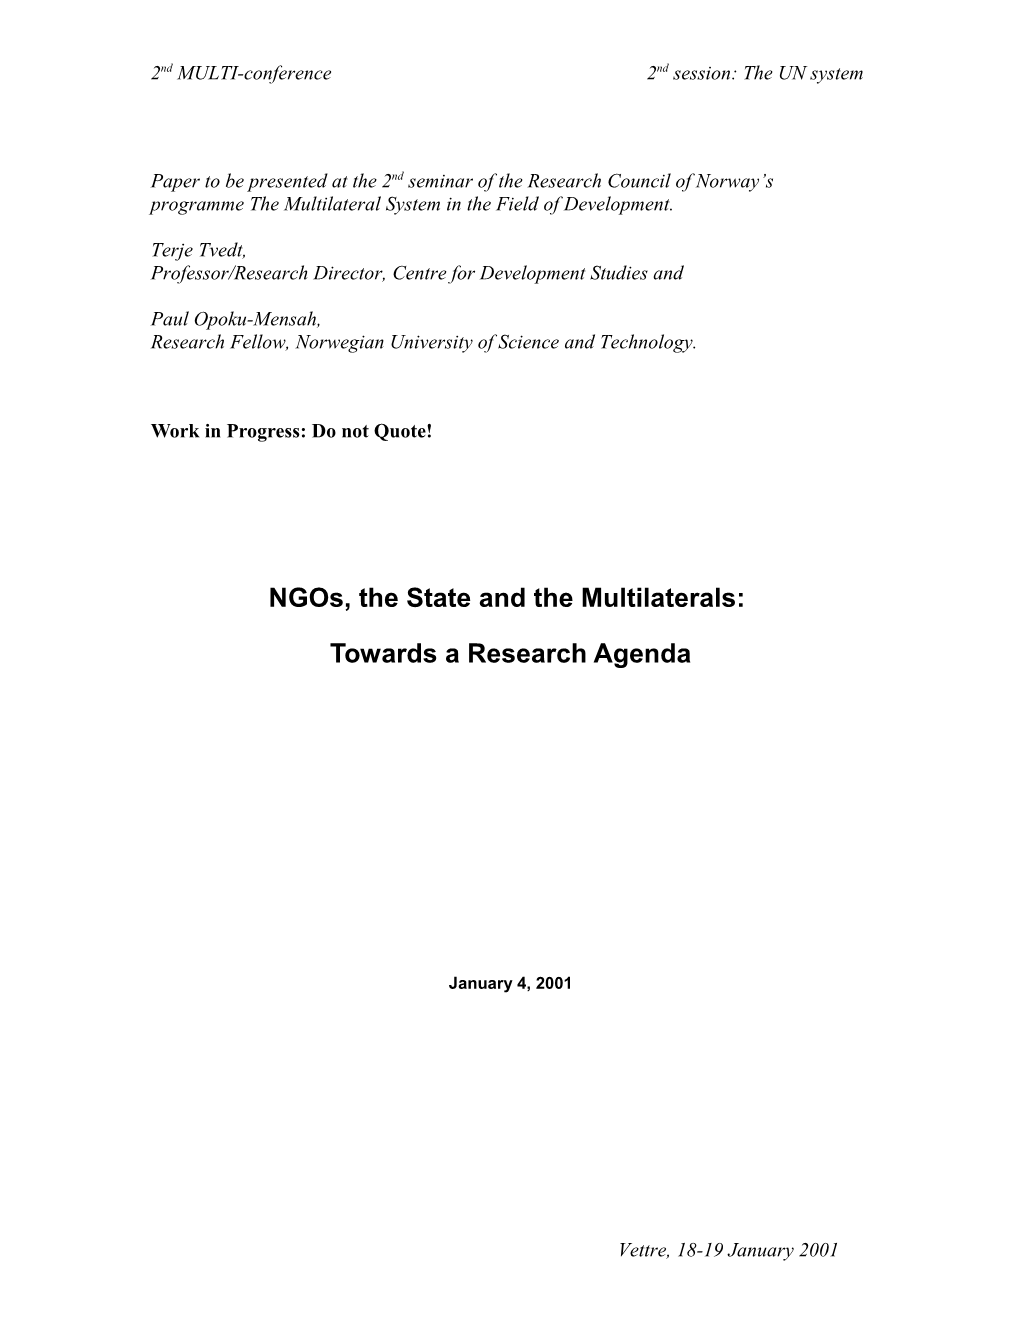 Ngos, the State and the Multilaterals: Towards a Research Agenda